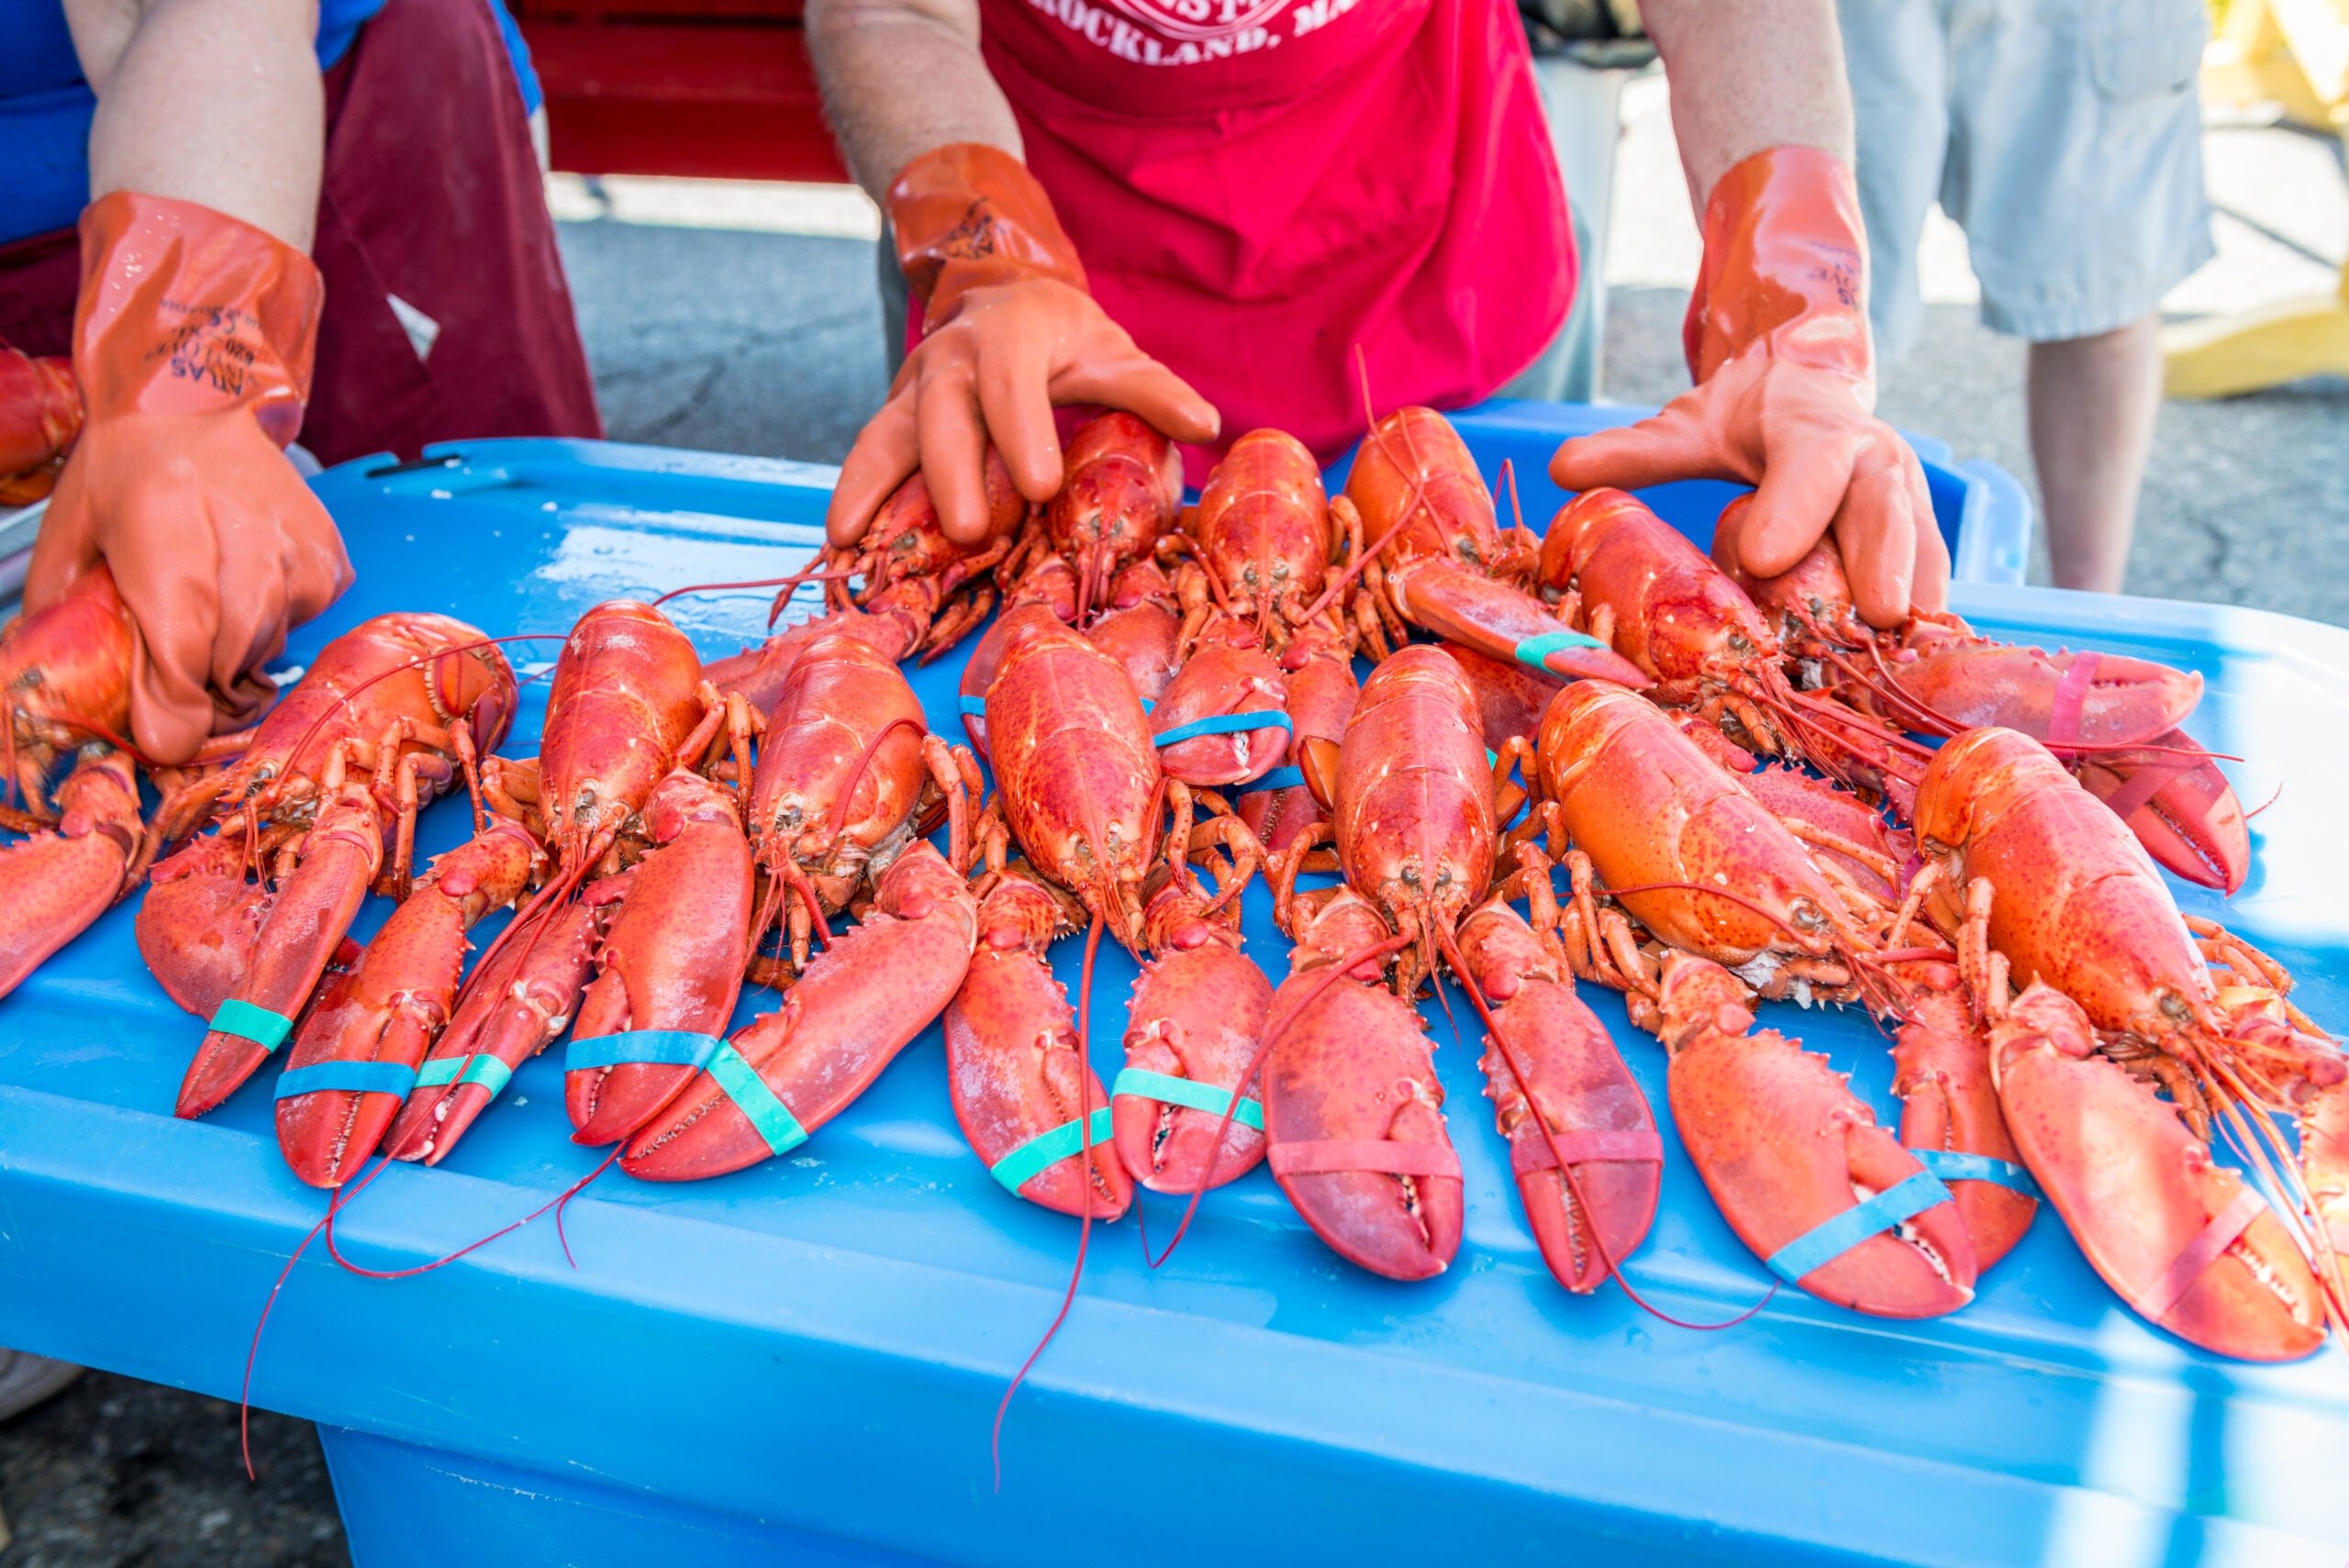 when is the maine lobster festival